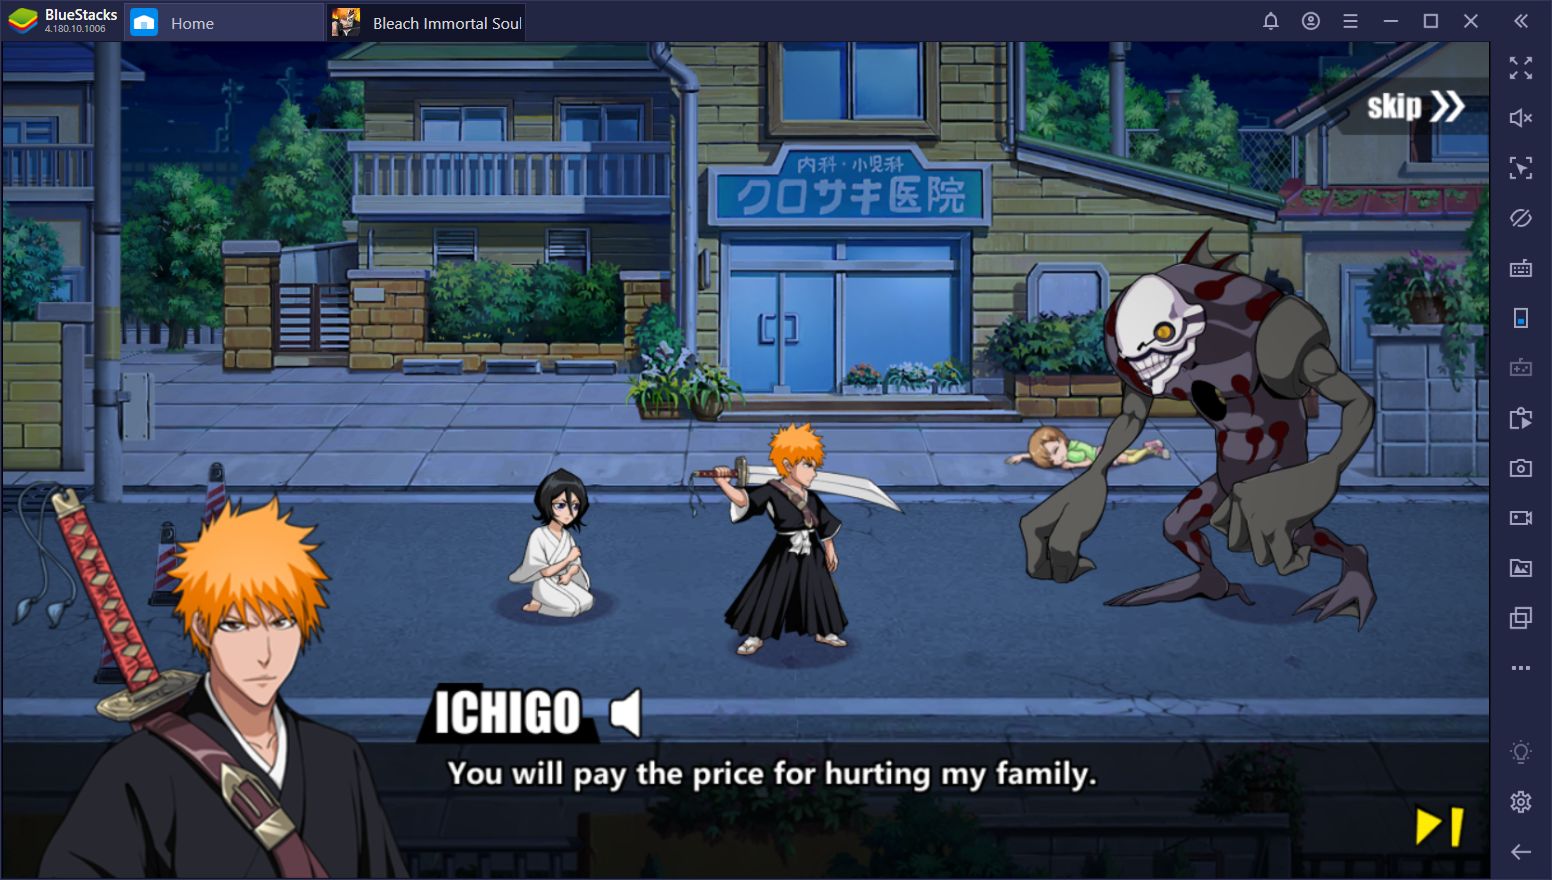 Beginner's Guide for Bleach: Immortal Soul - All the Starter Tips You Need  to Know